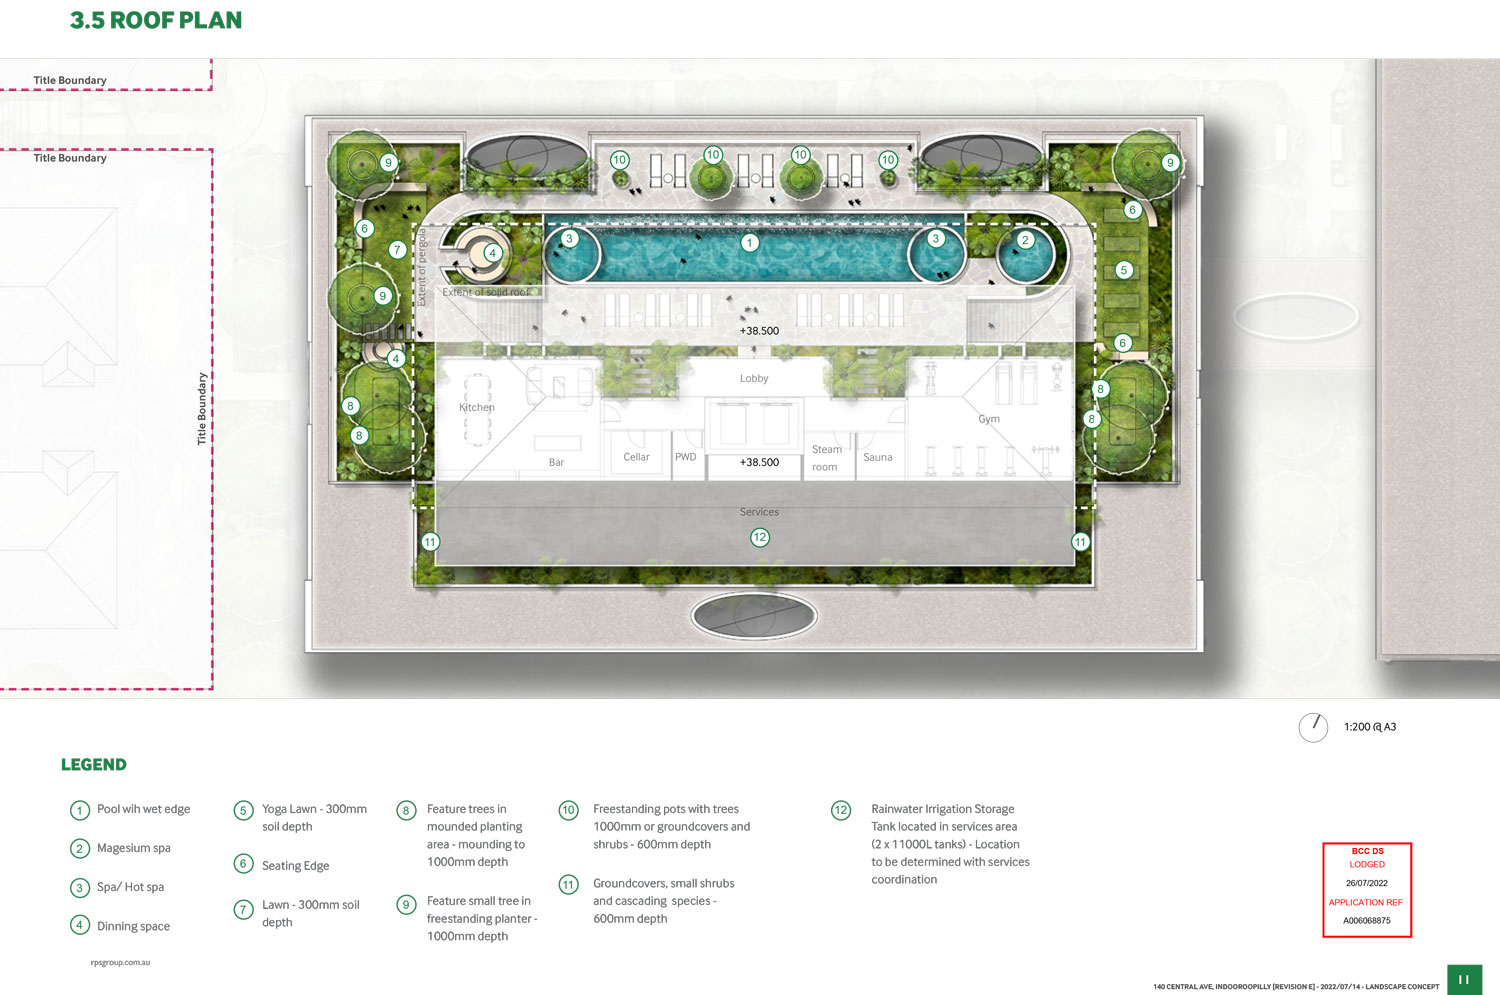 Rooftop landscaping plan by RPS Group